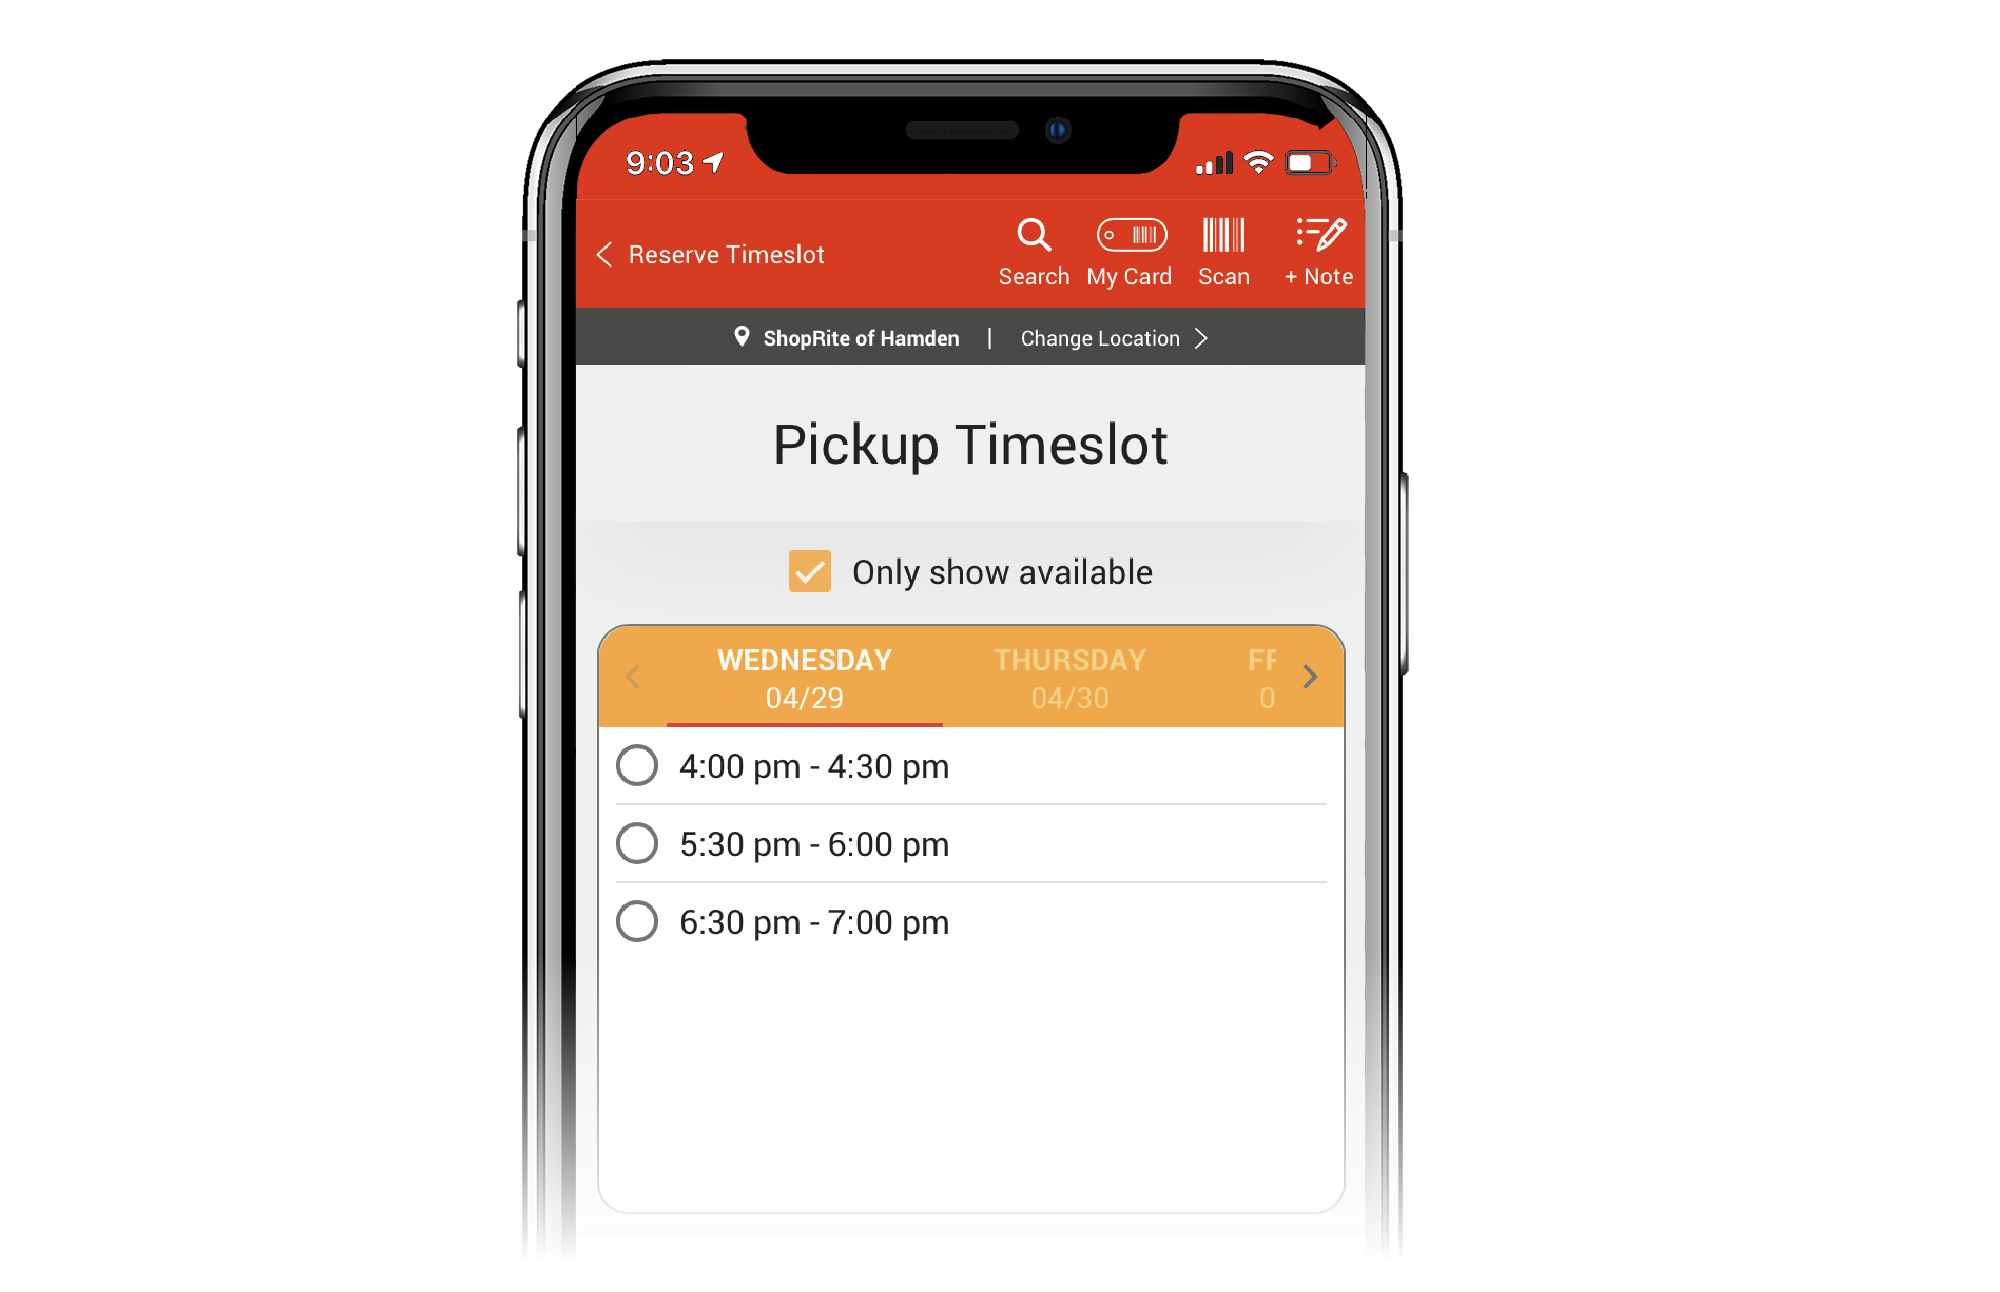 phone screen showing shoprite app and pickup timeslot screen reads only show available with wednesday april 29 afternoon times listed